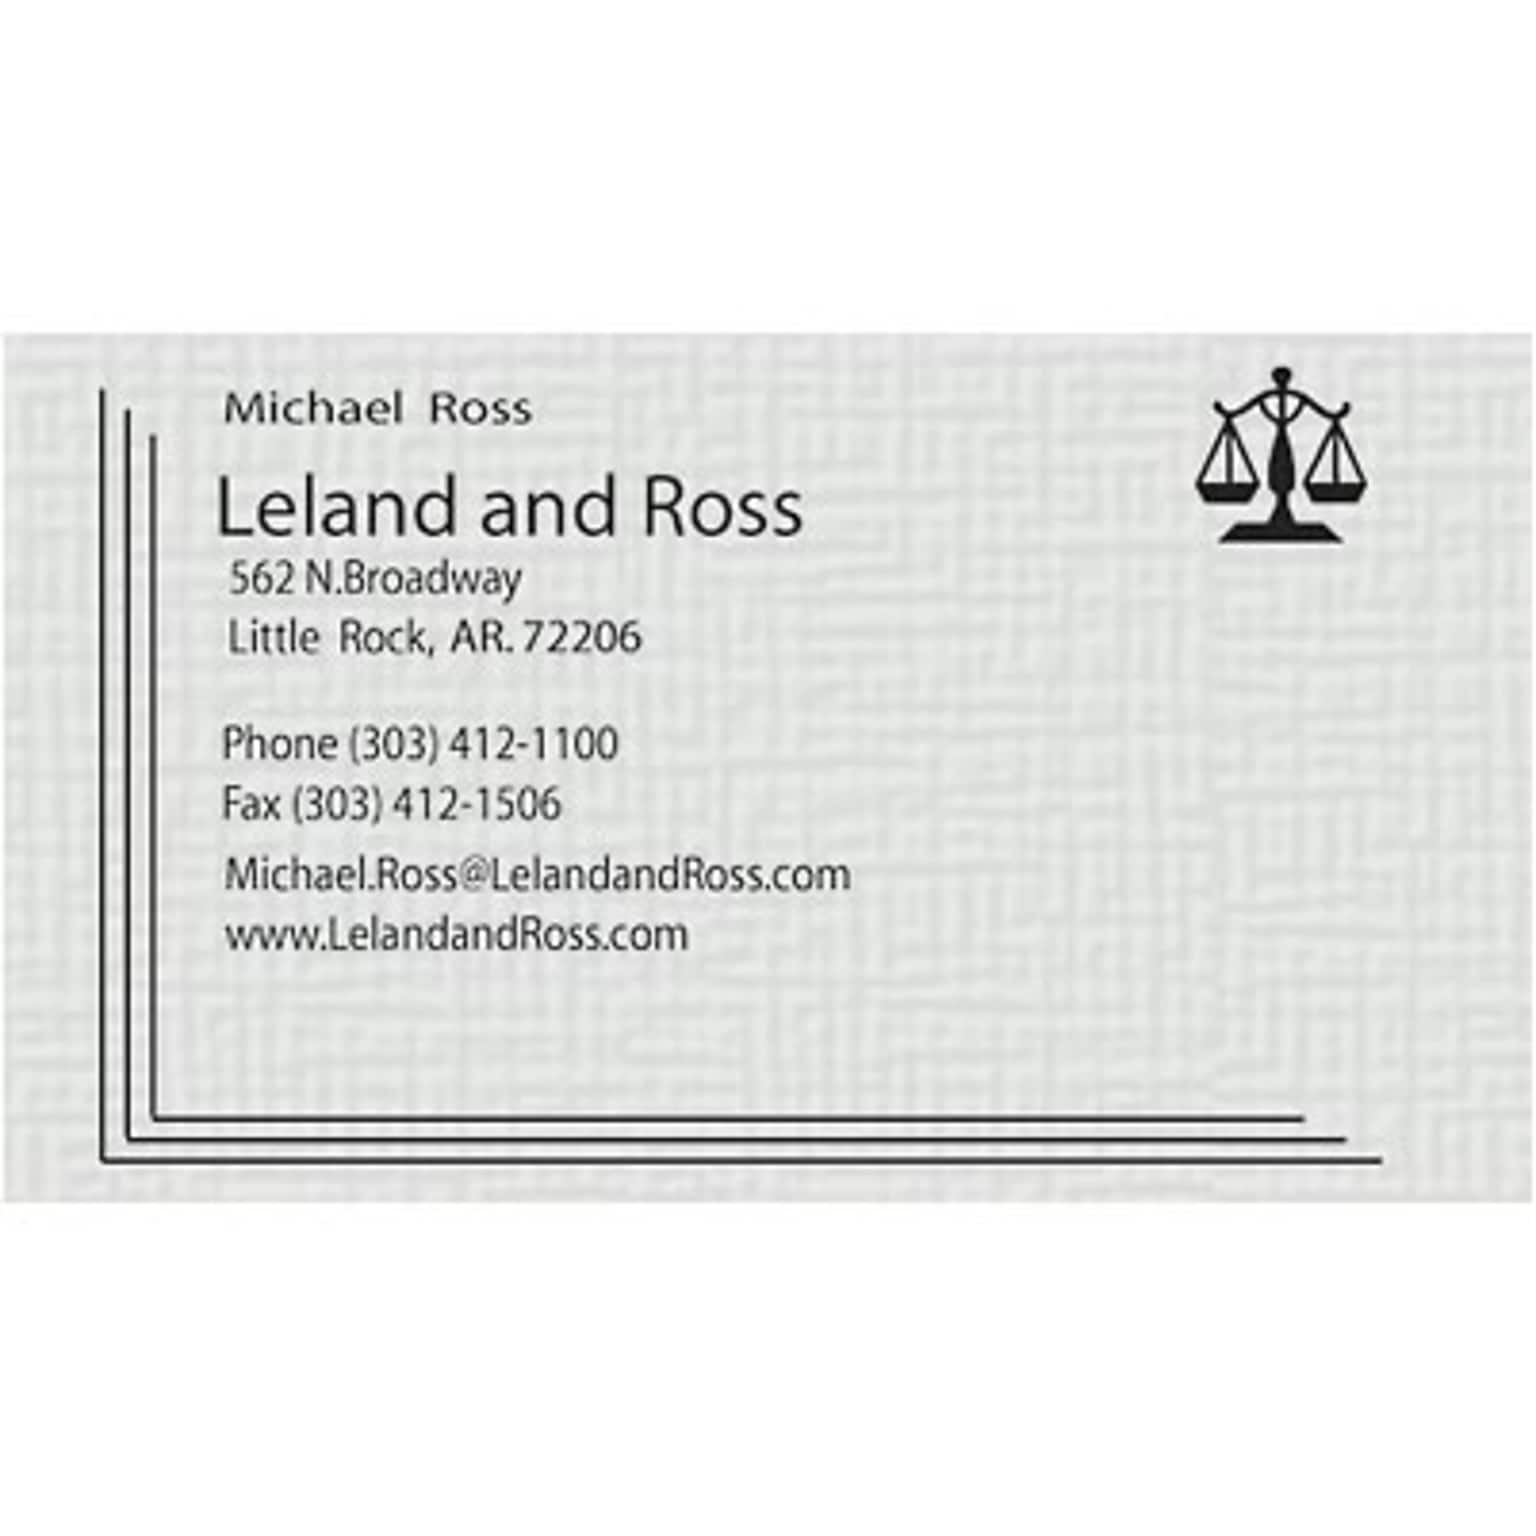 Custom 1-2 Color Business Cards, CLASSIC CREST® Smooth Antique Gray 80#, Raised Print, 1 Standard Ink, 2-Sided, 250/PK